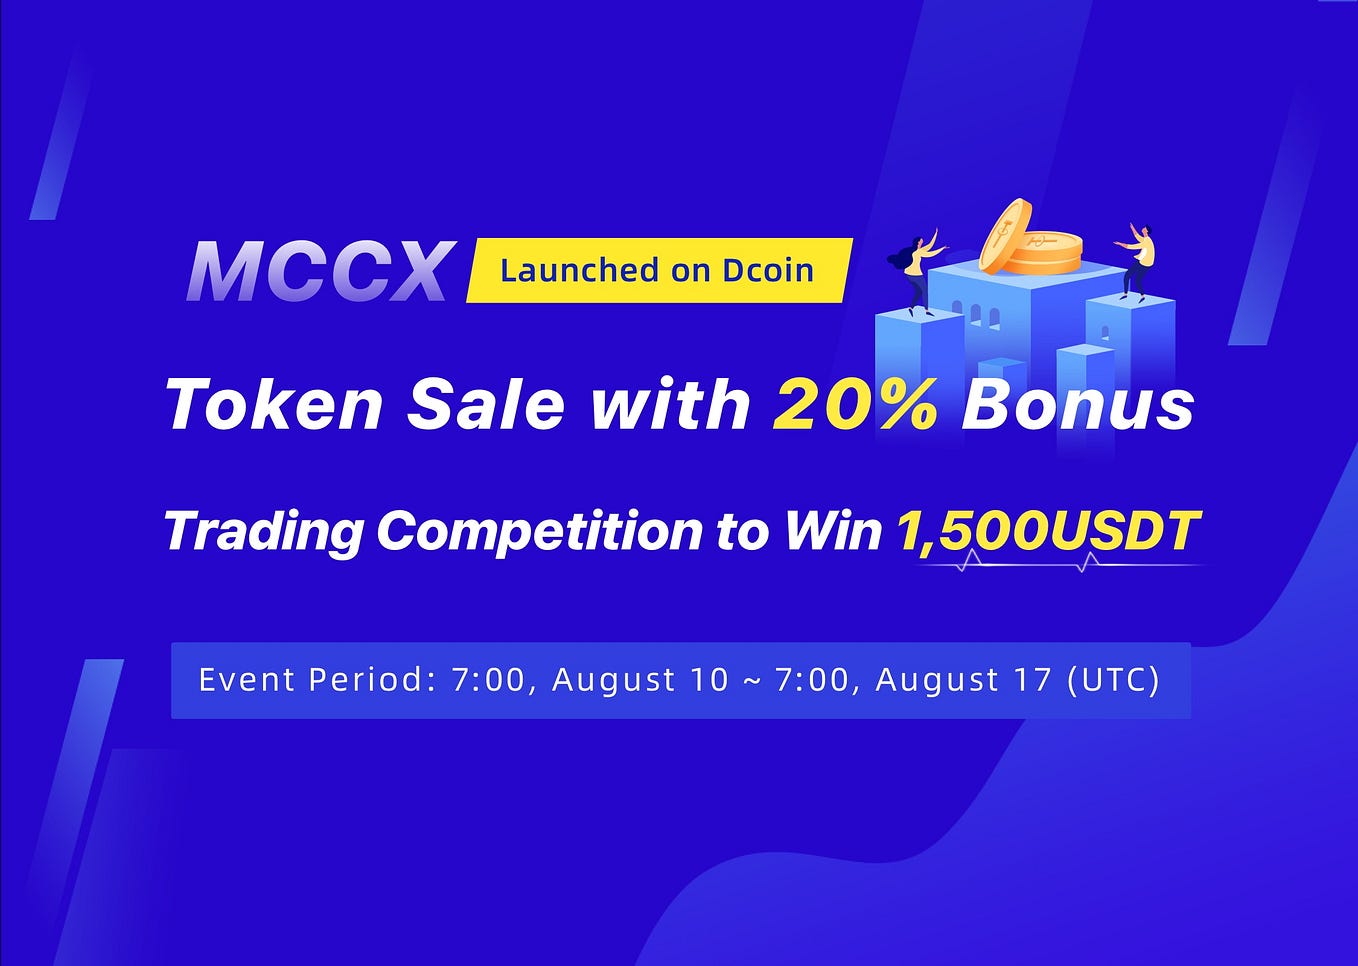 MCCX Launched on August 11, MCCX Token Sale and Trading Competition to win 1500USDT